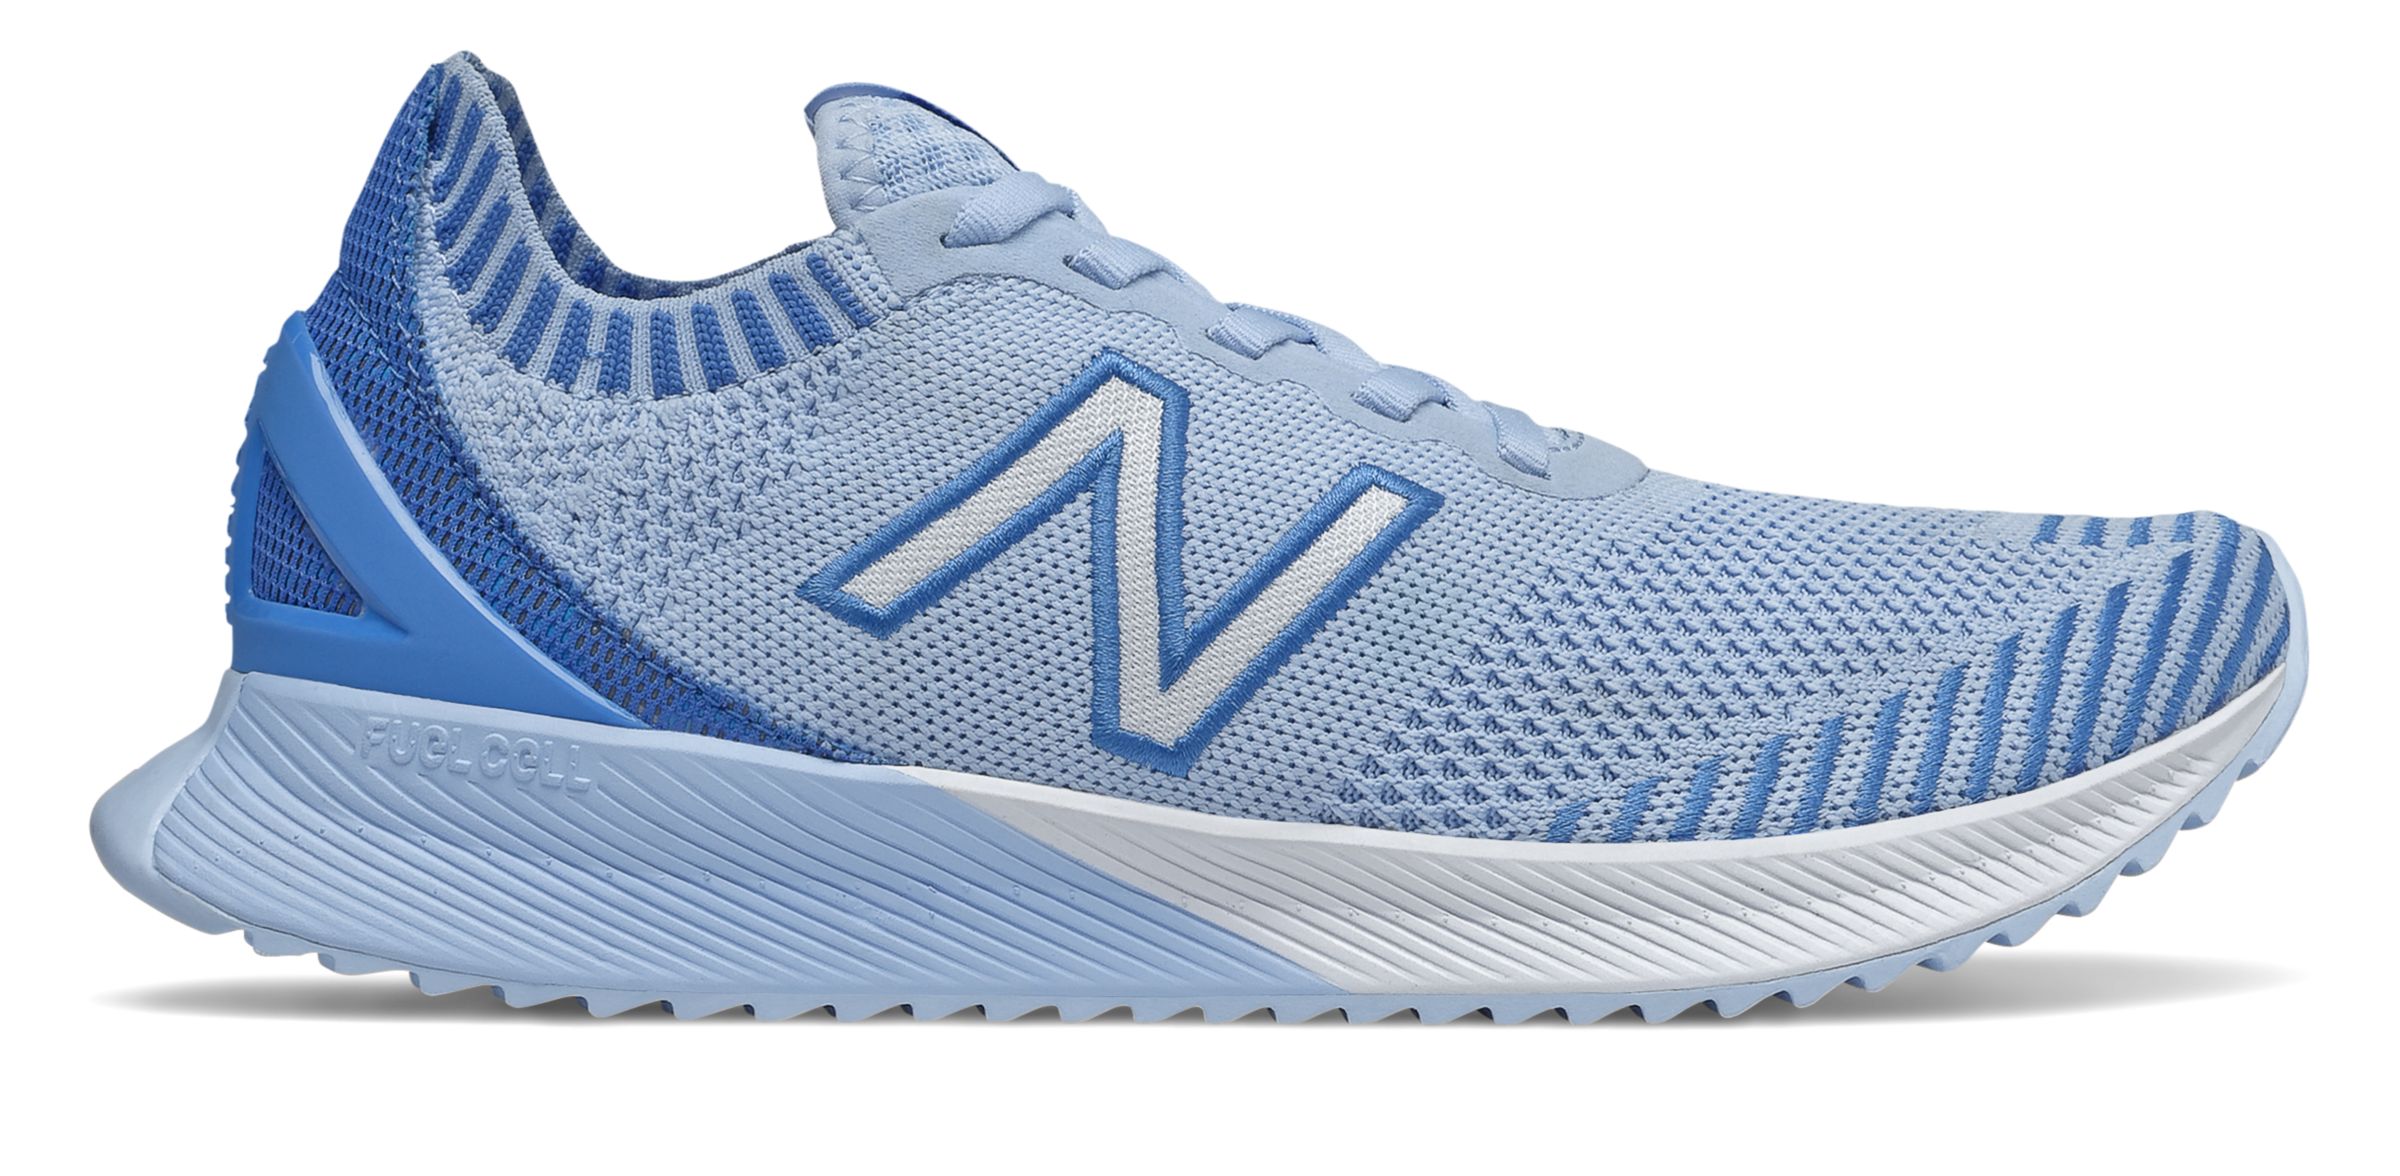 Fuel Cell Echo - New Balance